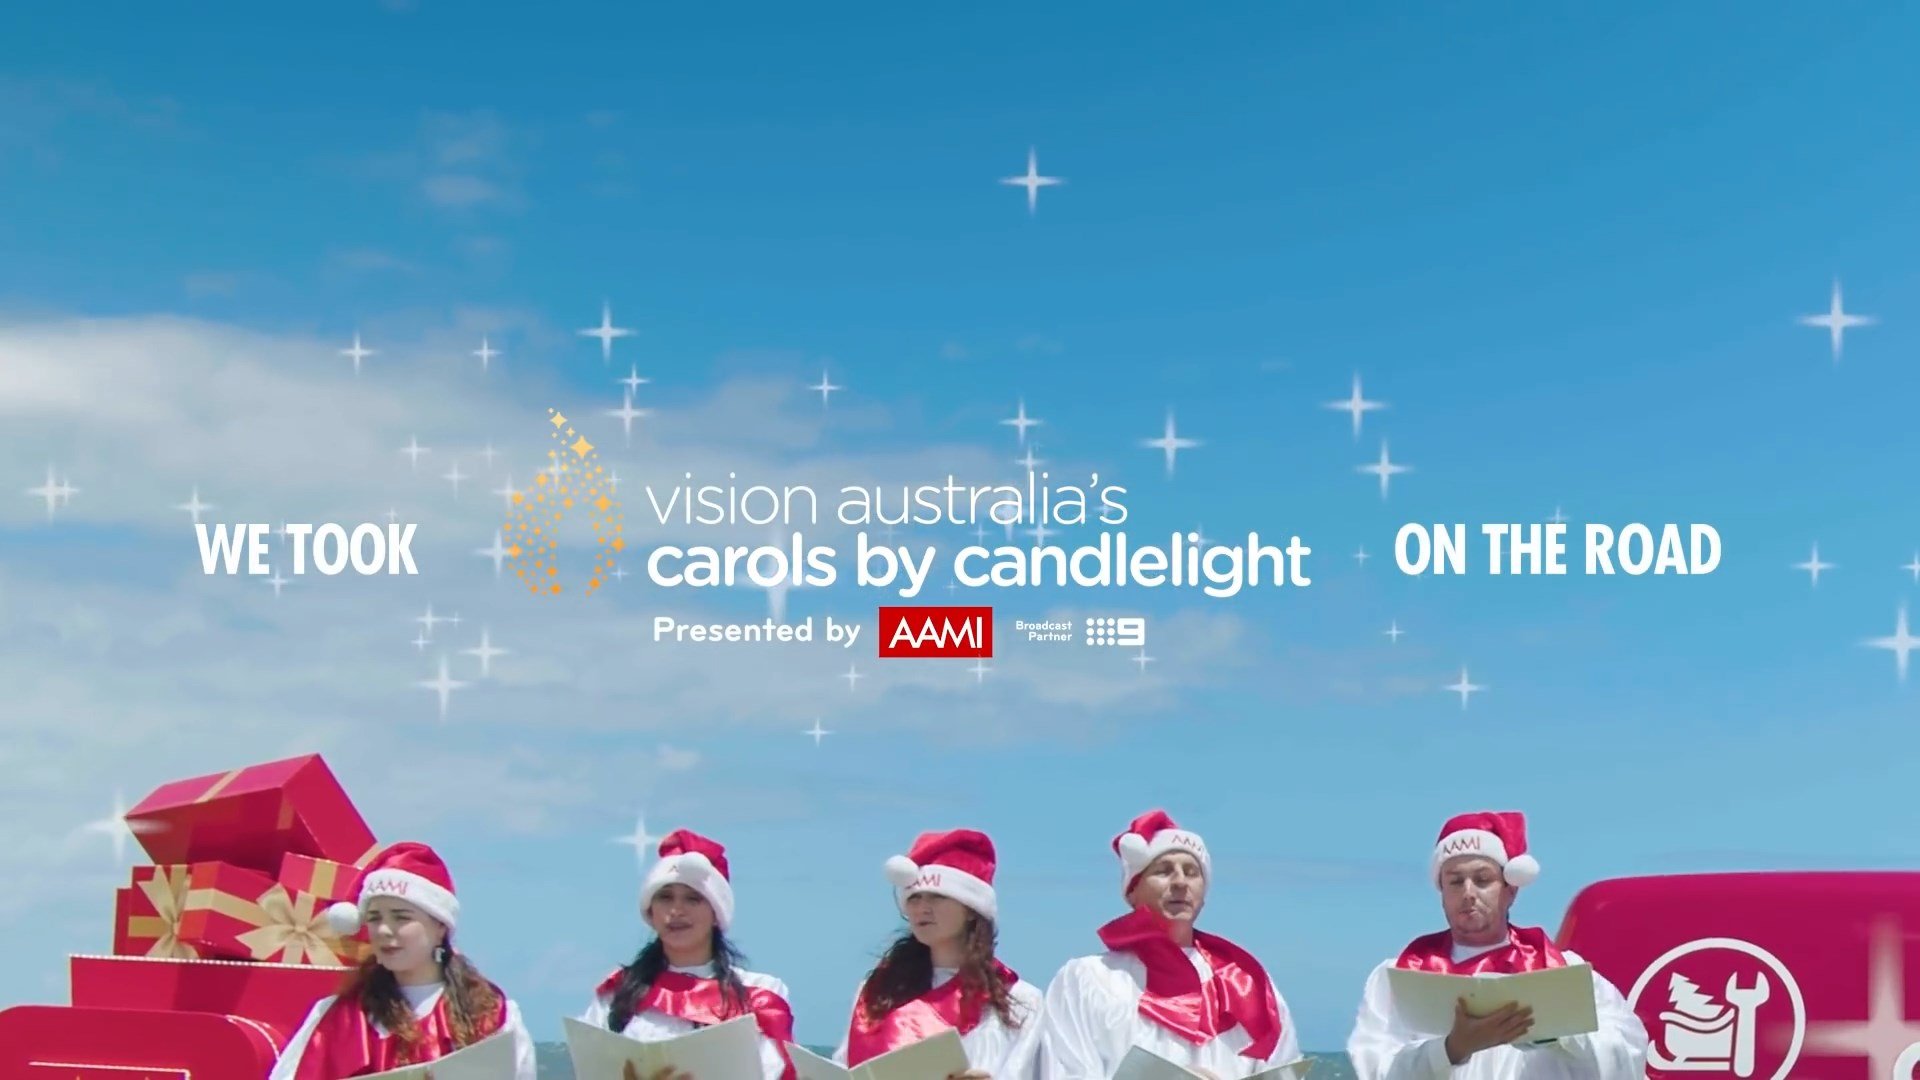 y2mate.com - AAMI covers the community with carols_1080p.mp4.webm_snapshot_00.10.763.jpg